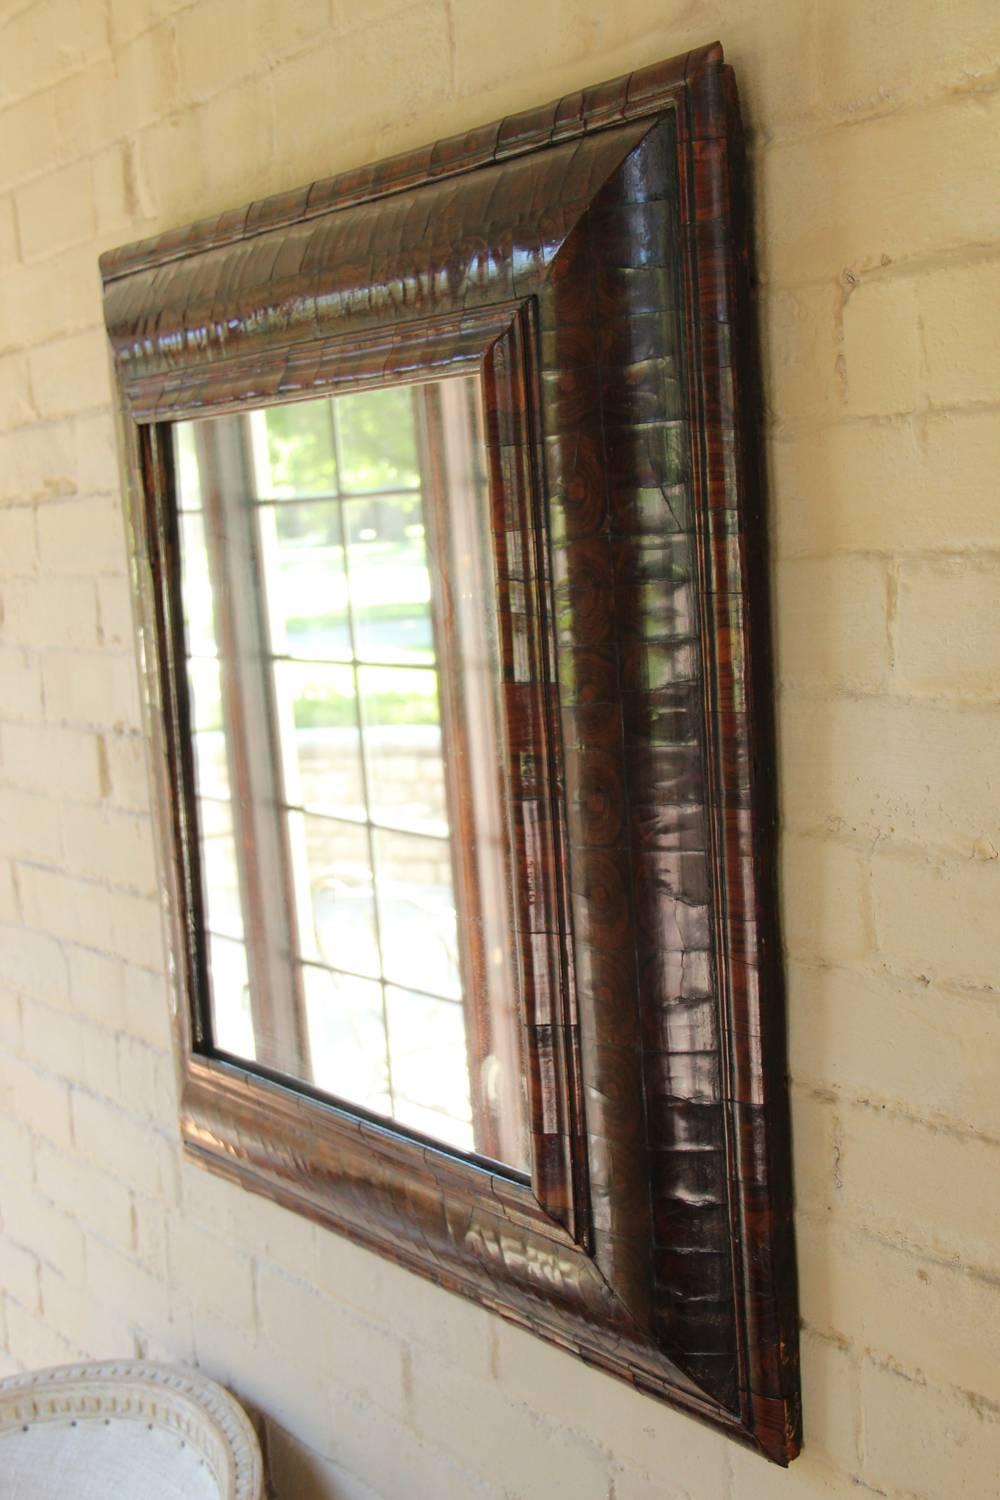 An English mirror with mercury plate from the 18th century of exceptional detail. The frame is made of crosscut and book-matched Brazilian rosewood veneer and has a beautiful French polished finish. The arched top, likely added during the 19th